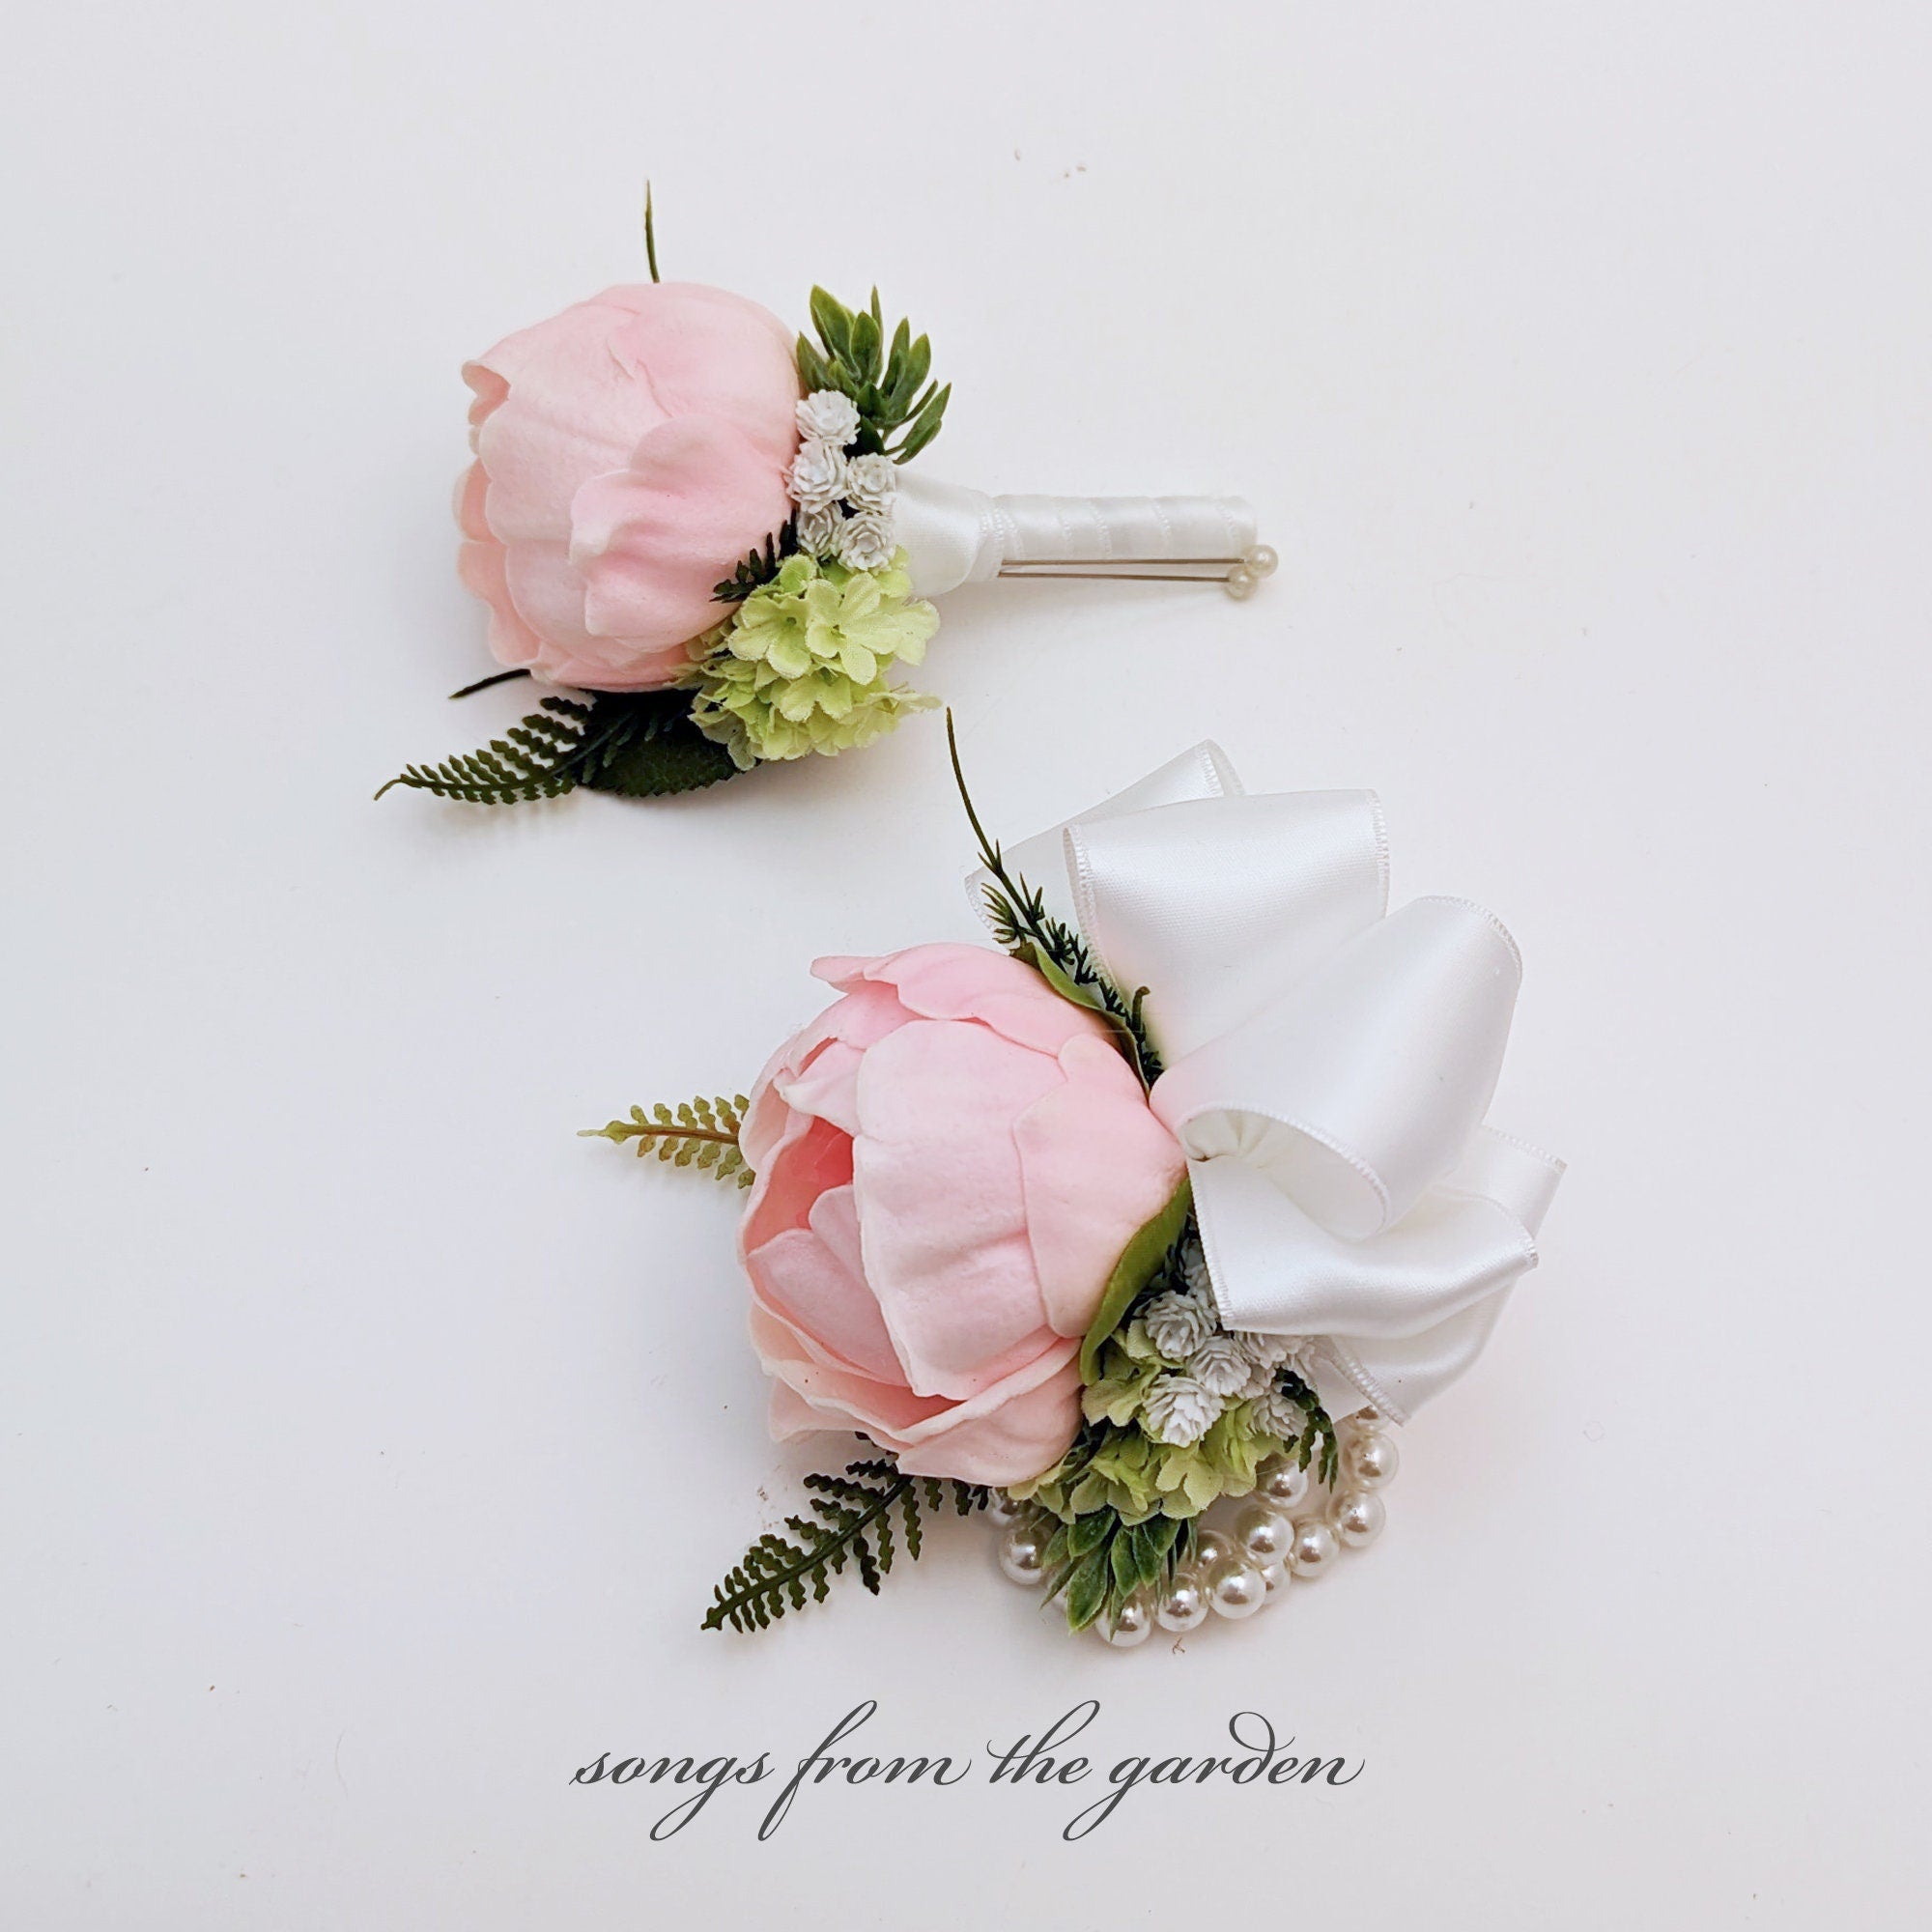 Pink Peony Boutonniere or Corsage - Hops Viburnunam Baby's Breath Accents -  Groom Groomsmen Boutonnieres Wedding Prom Homecoming Corsage